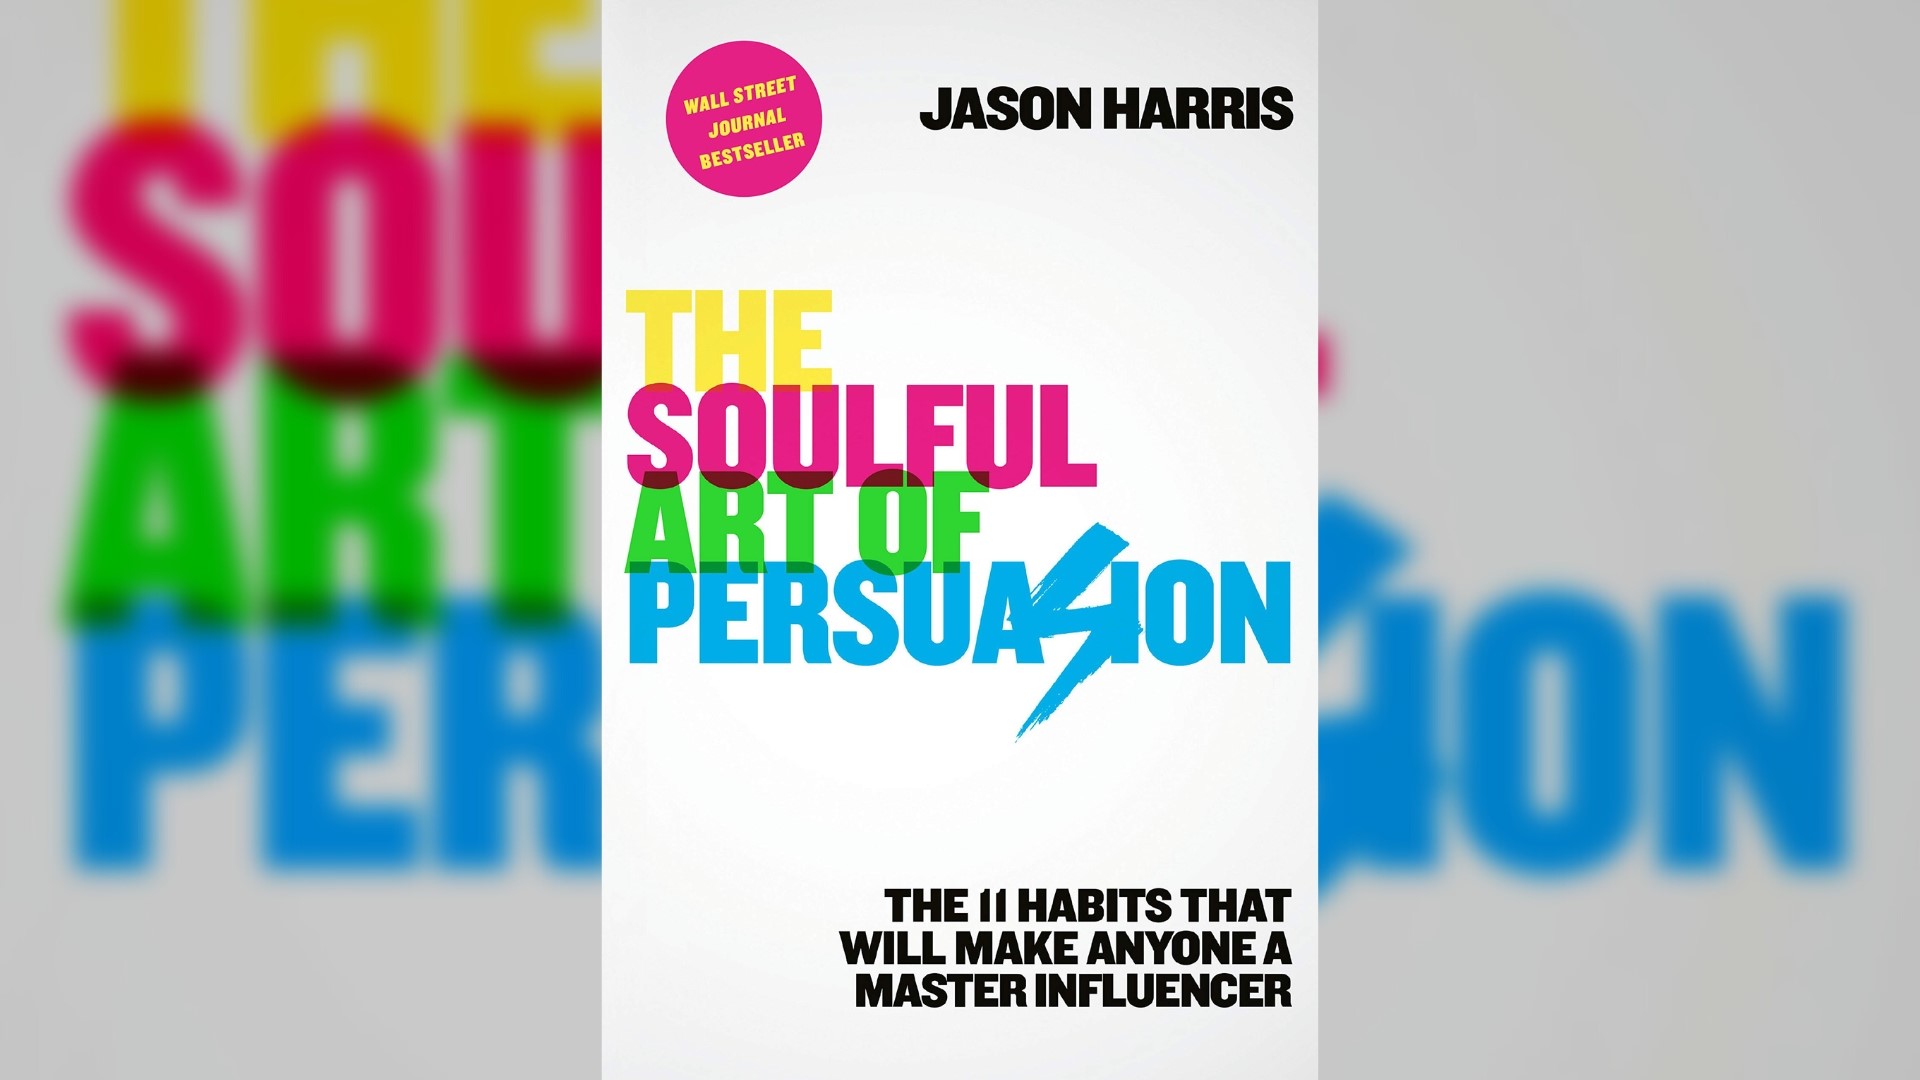 "The Soulful Art of Persuasion" is a book by Jason Harris that tells us how to persuade with our character and actions. #newdaynw